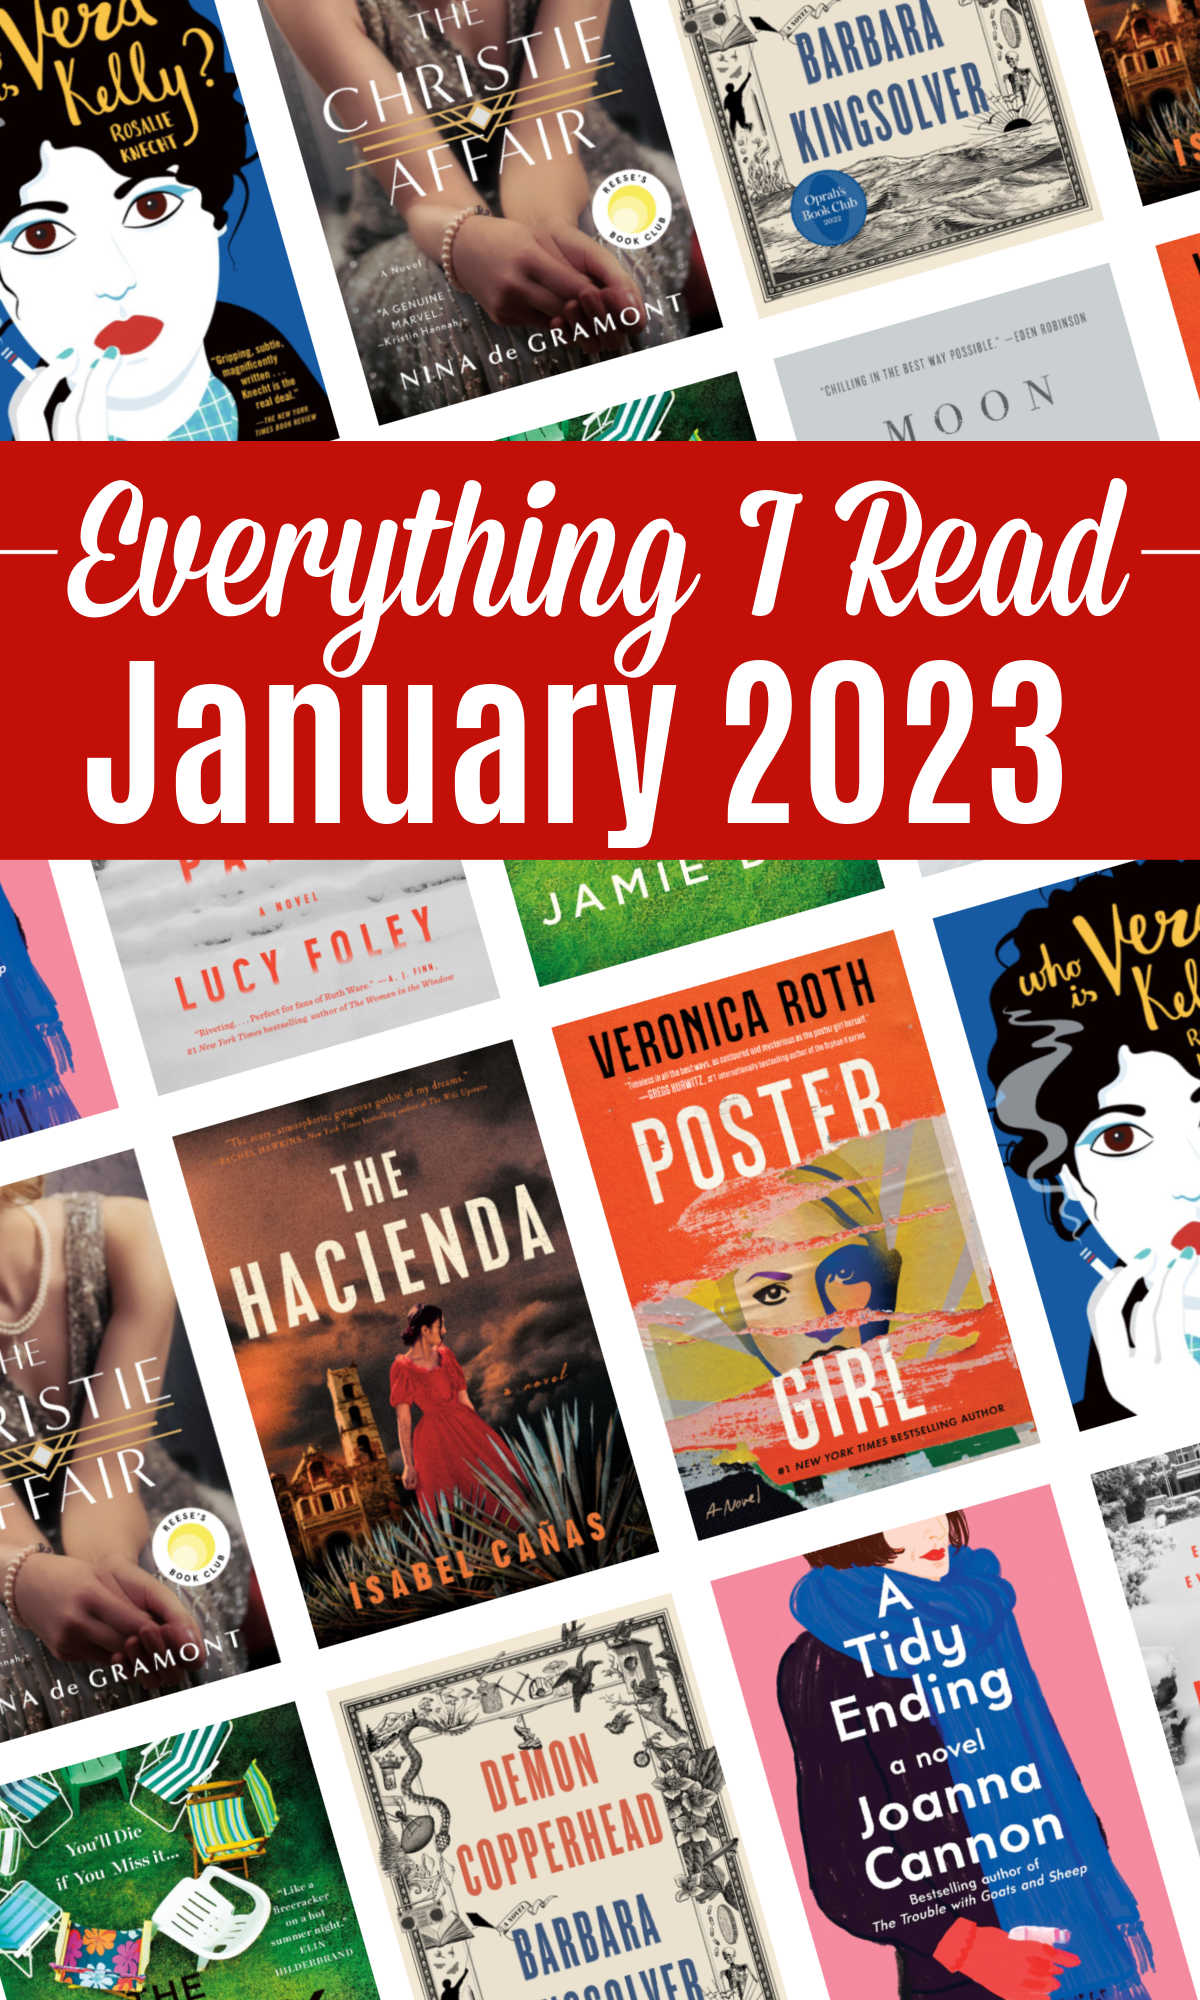 A collage of different book covers with a text overlay (Everything I Read January 2023).